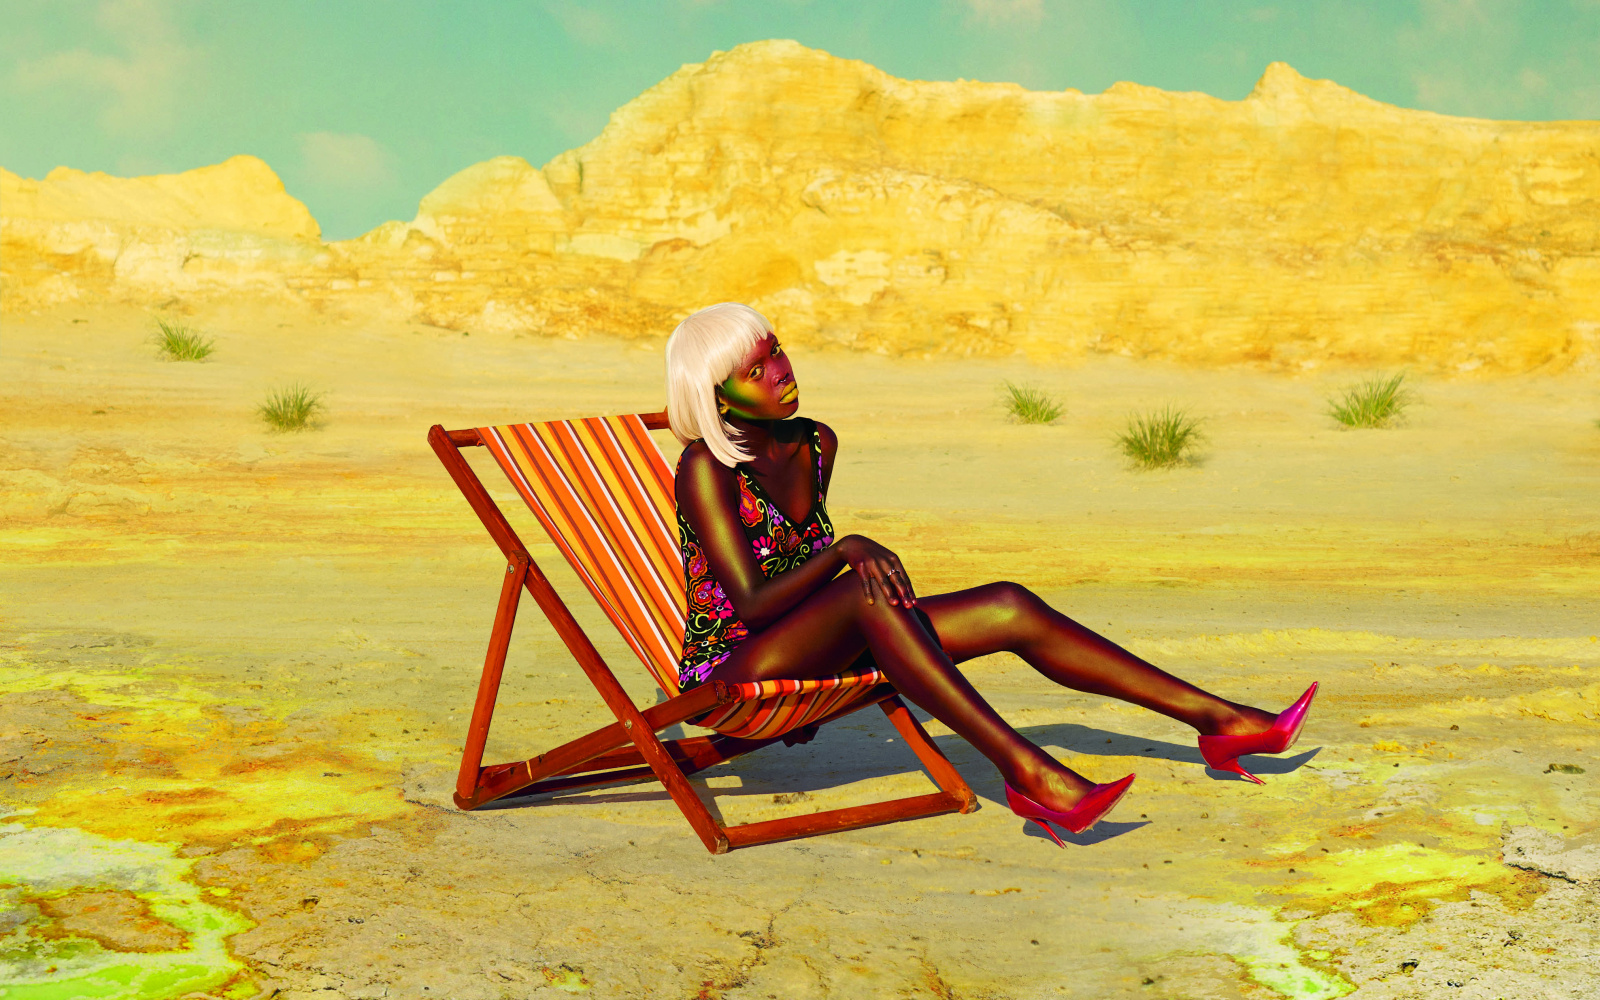 In a mountainous steppe landscape, a woman who looks like a model sits upright in a sun chair.